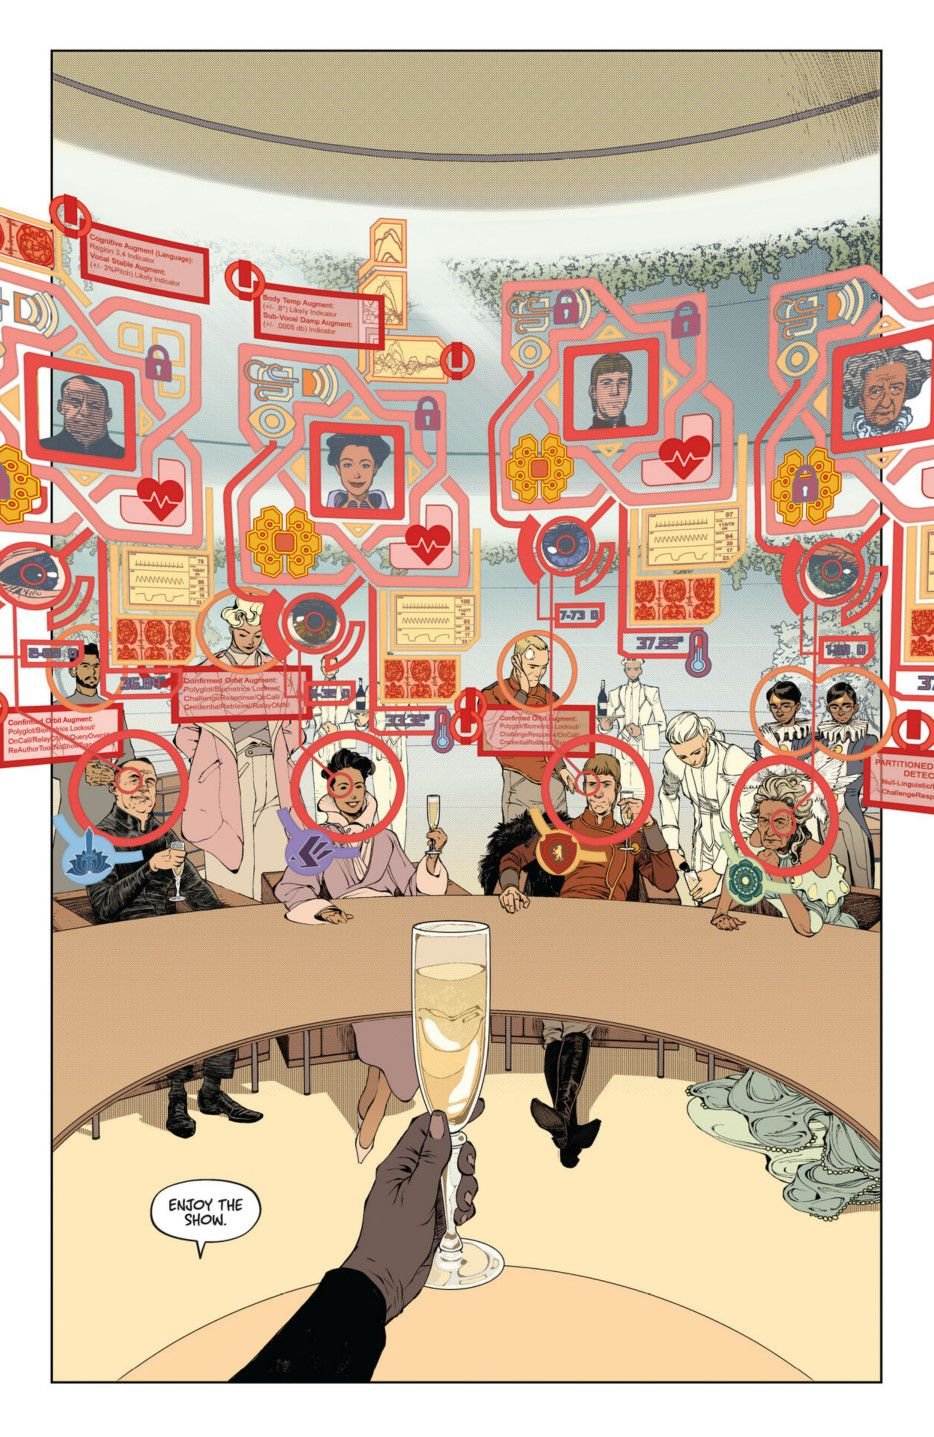 A full-page illustration from Dawnrunner #1, featuring a point-of-view shot of a man holding a champagne glass at a table of guests identified via an augmented reality heads-up display.